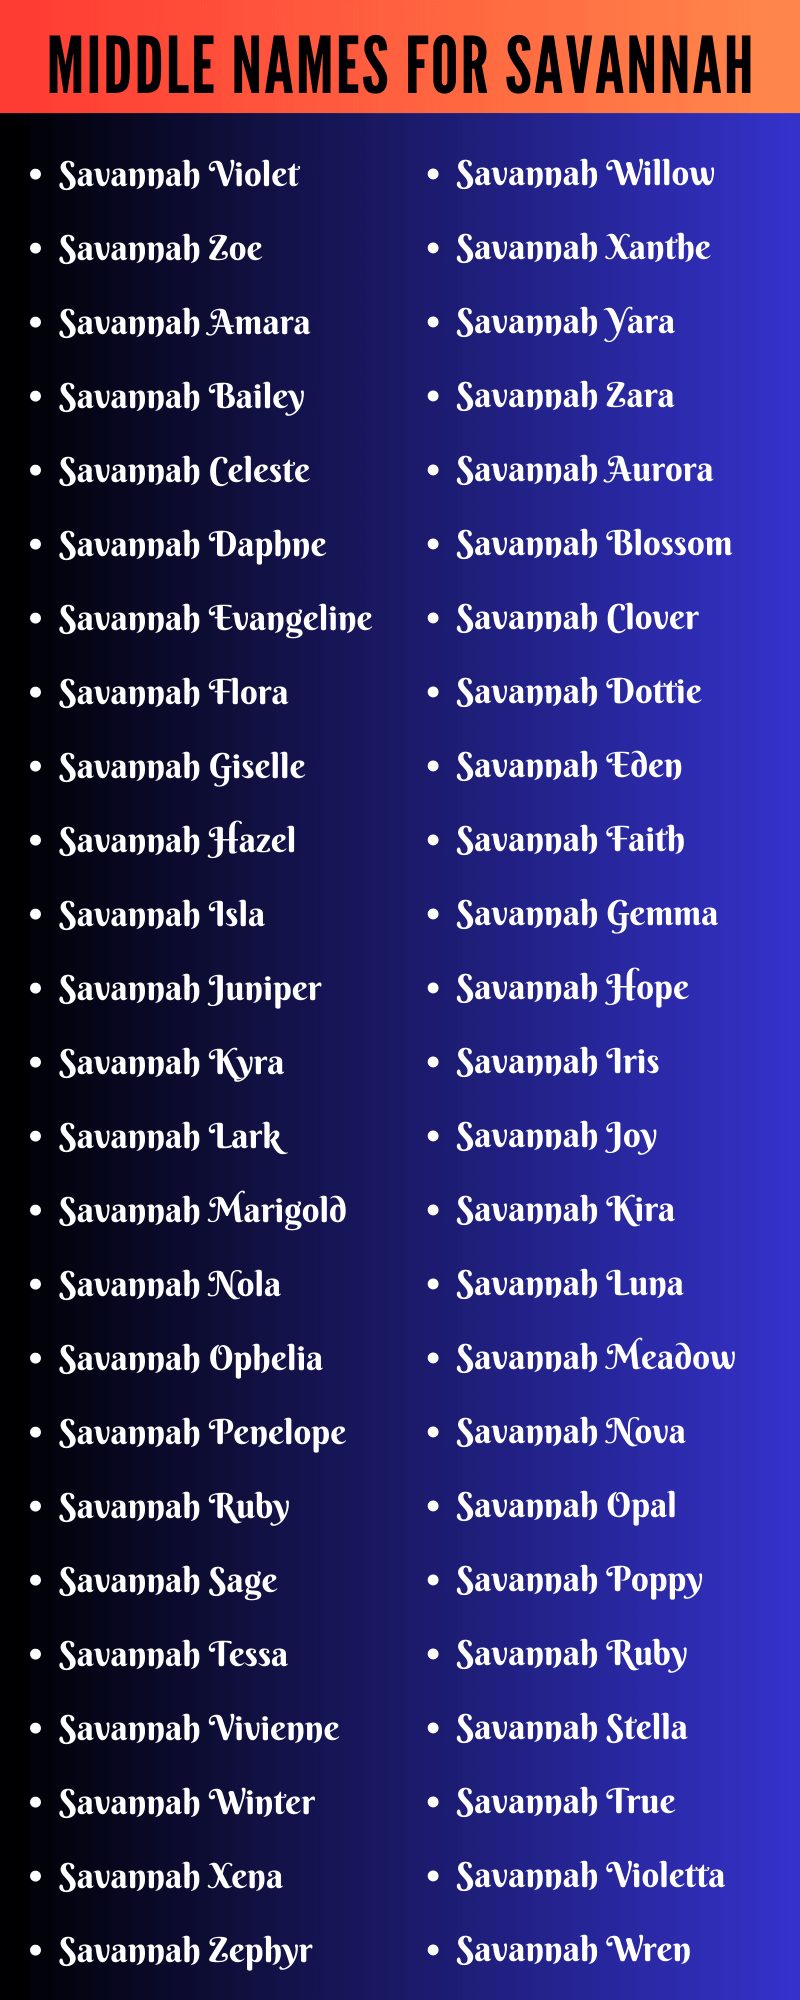 Middle Names For Savannah